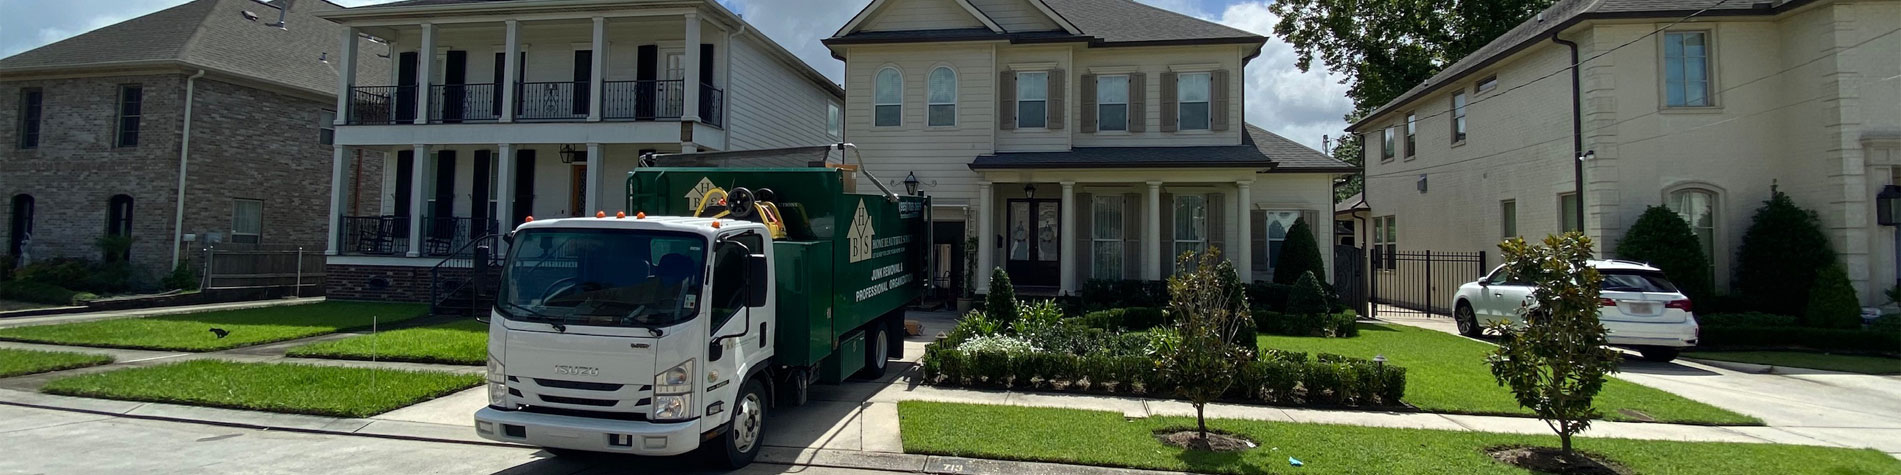 Junk Removal Truck in a Metairie Neighborhood Completing Junk Removal Work